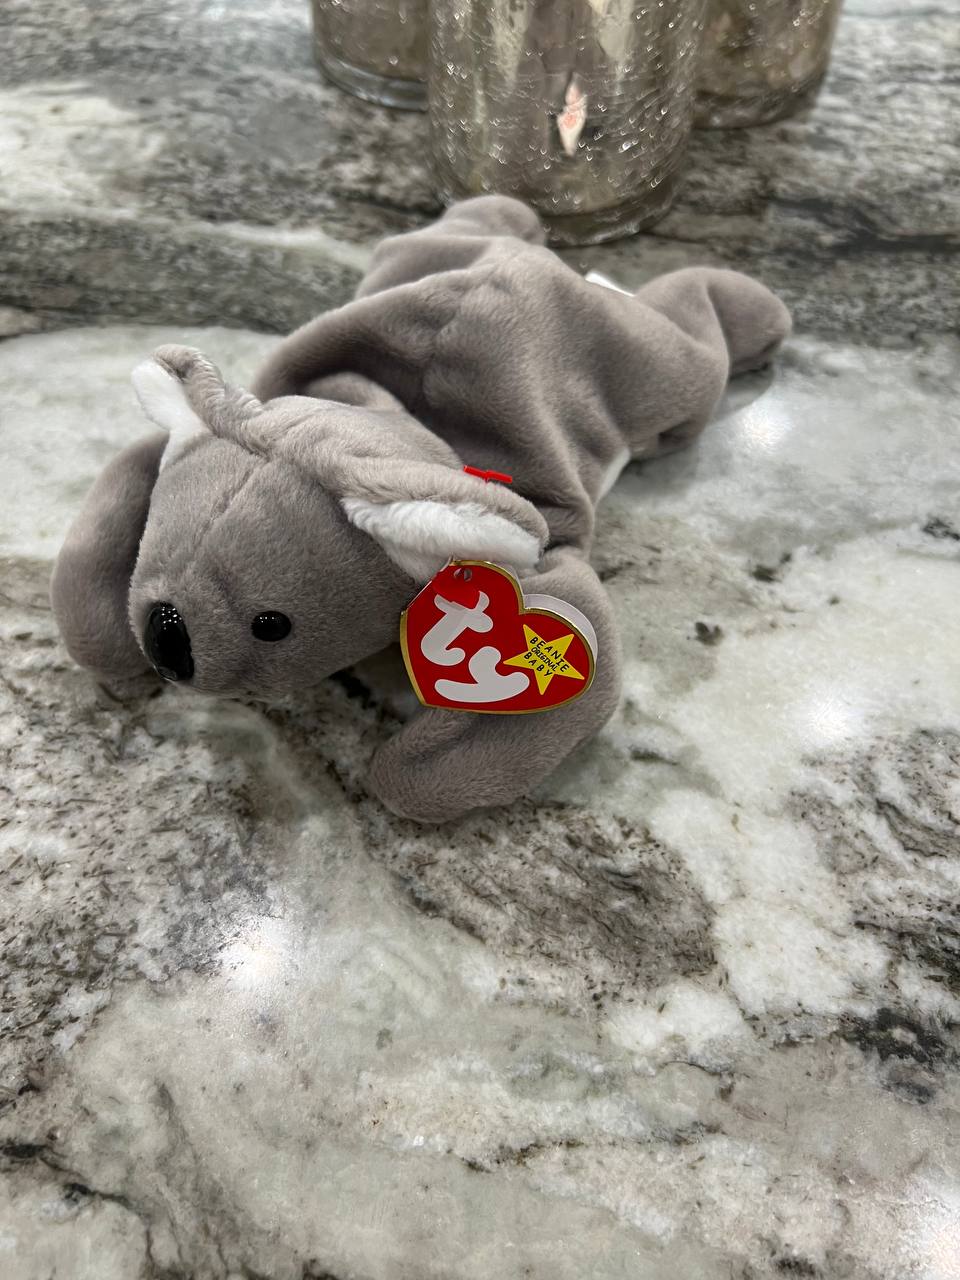 *RARE* MINT Mel Beanie Baby 1996 With Tag